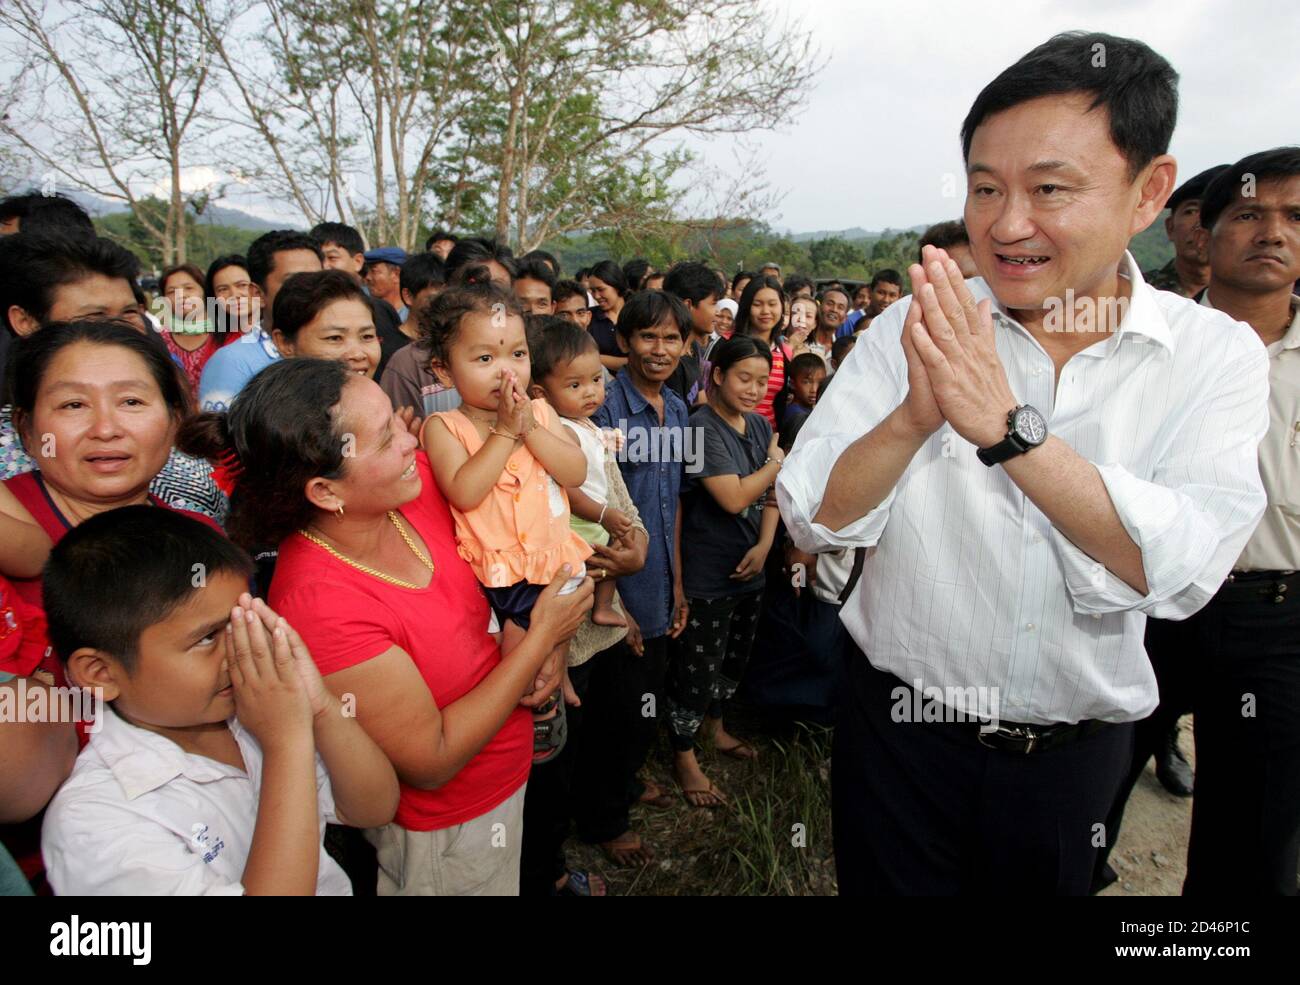 Thai Prime Minister Thaksin Shinawatra greets villagers in Yala province, 1,200 km (750 miles) south of Bangkok, on February 16, 2005. Thaksin arrived in the largely Muslim south on Wednesday with a stern message for villagers tempted to help separatist militants. REUTERS/Sukree Sukplang  SS/SA Stock Photo